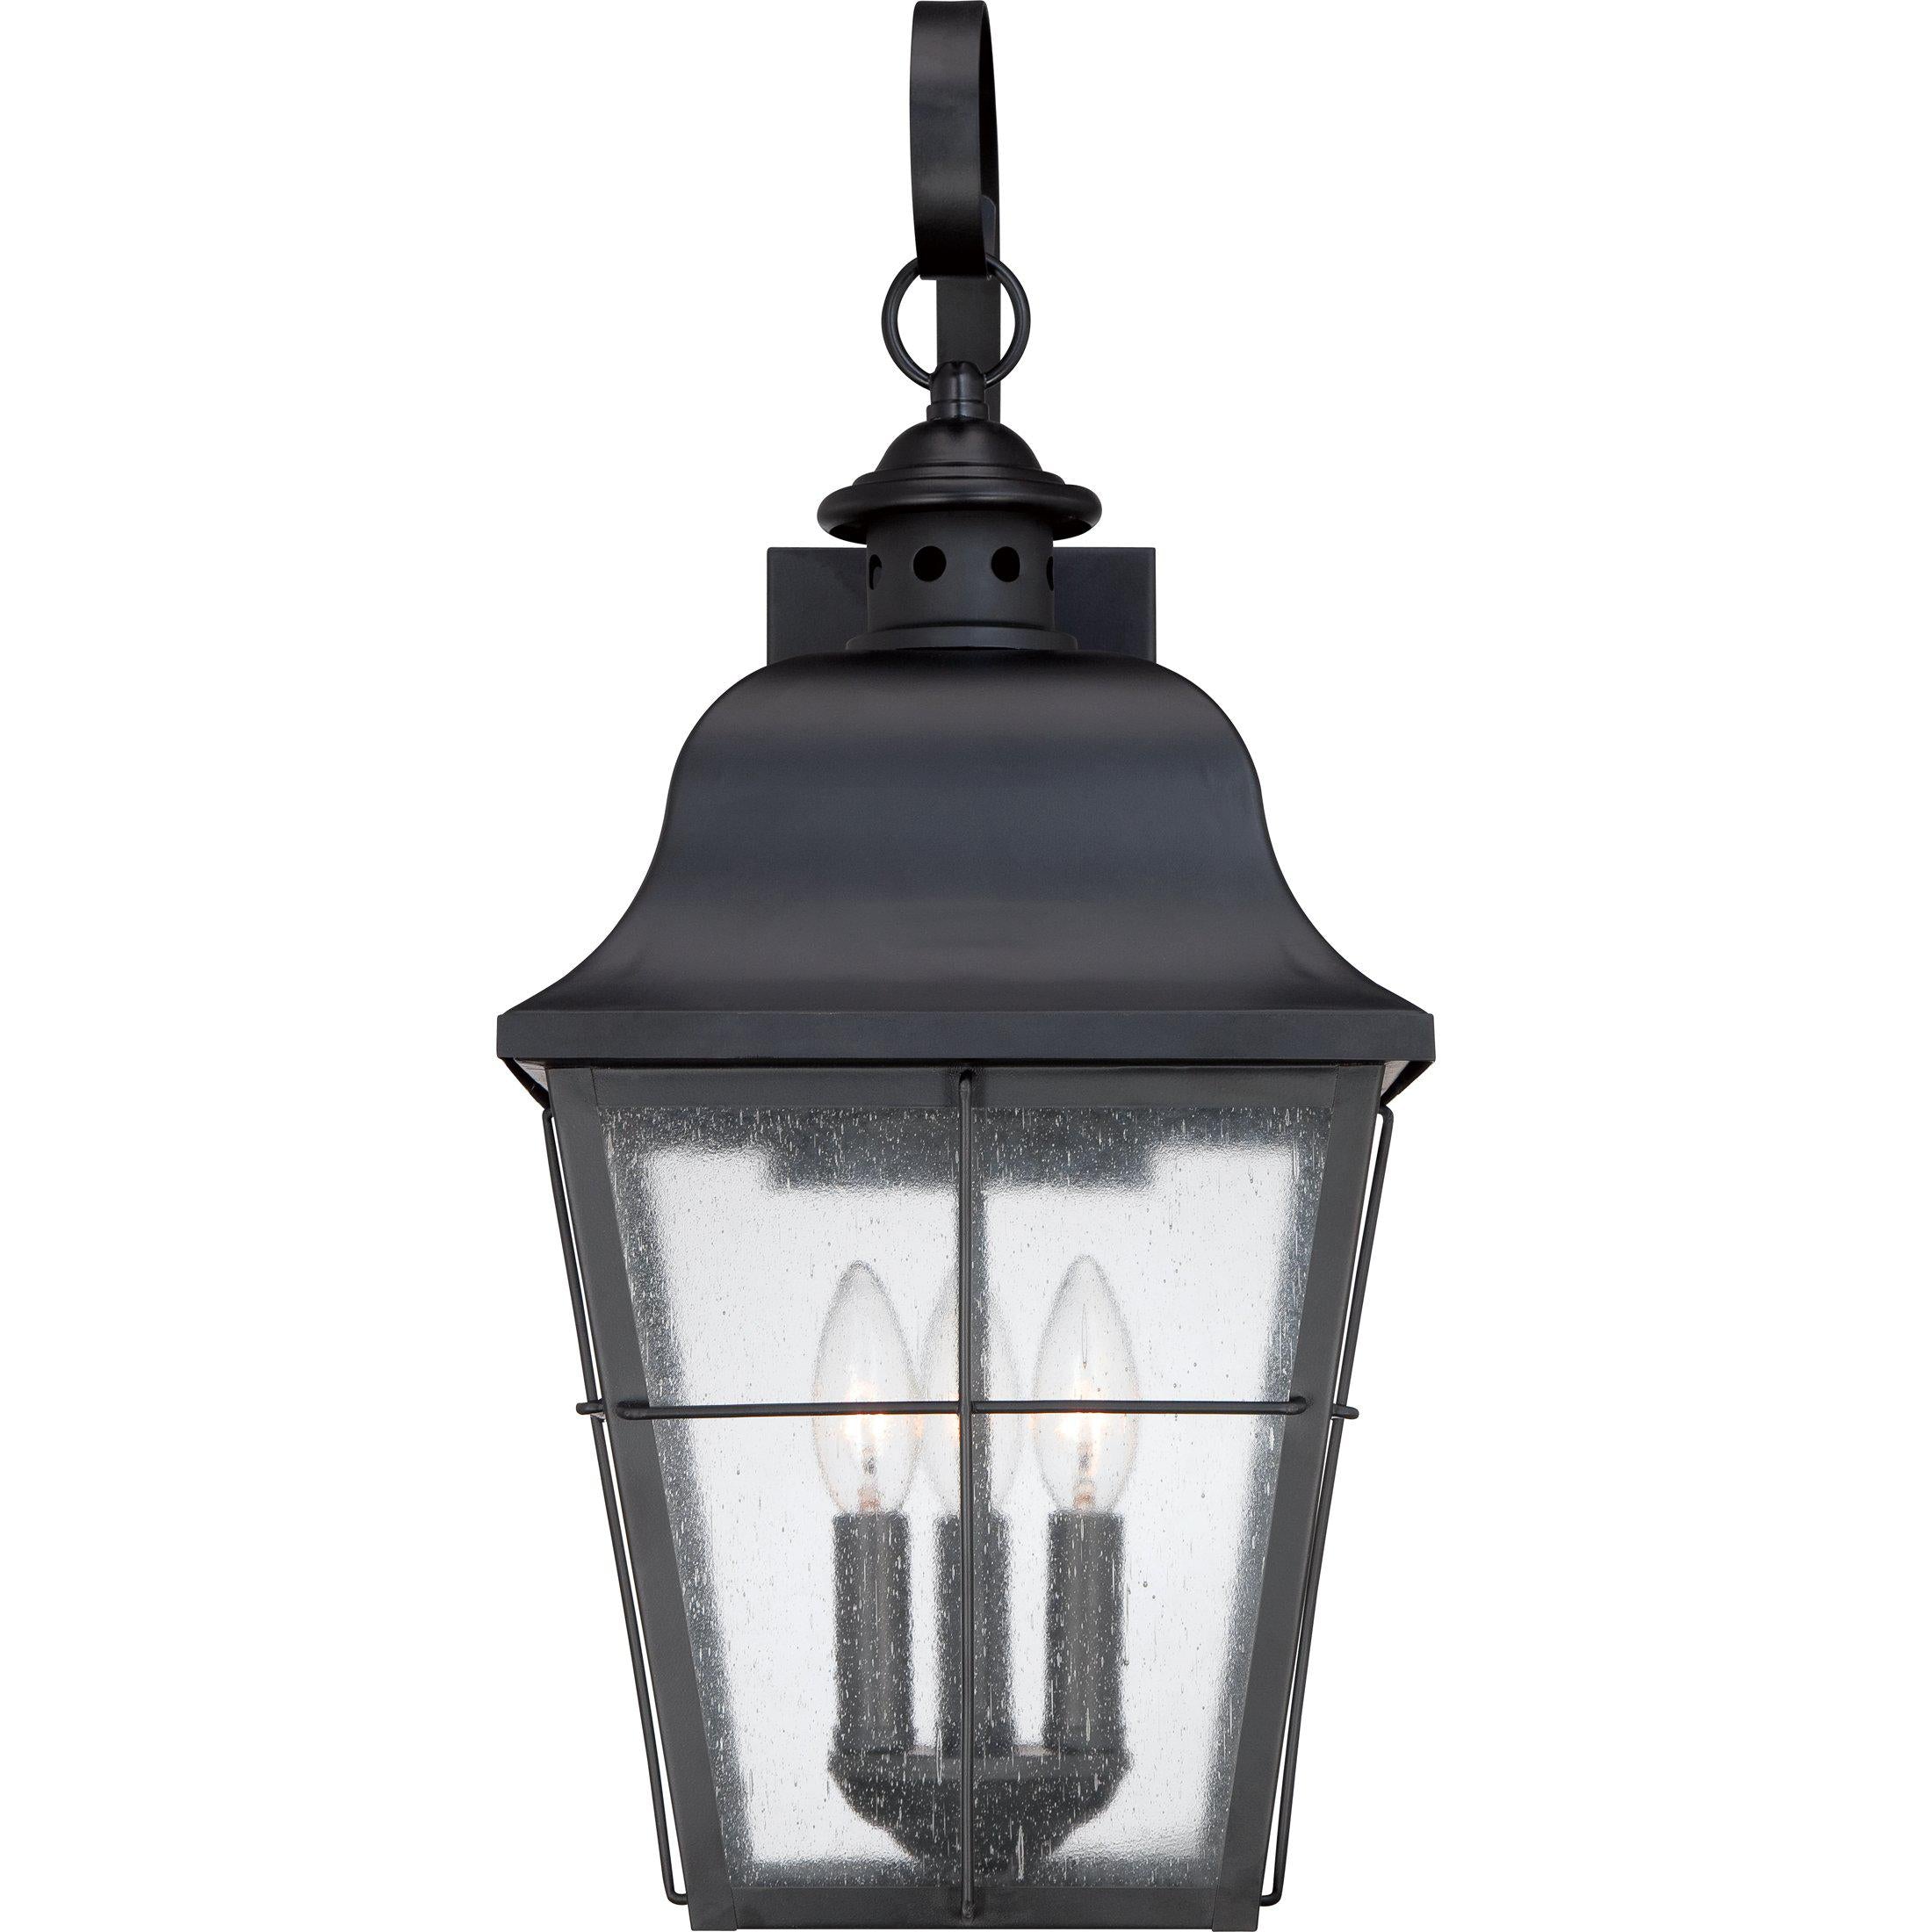 Quoizel  Millhouse Outdoor Lantern, Large Outdoor l Wall Quoizel   